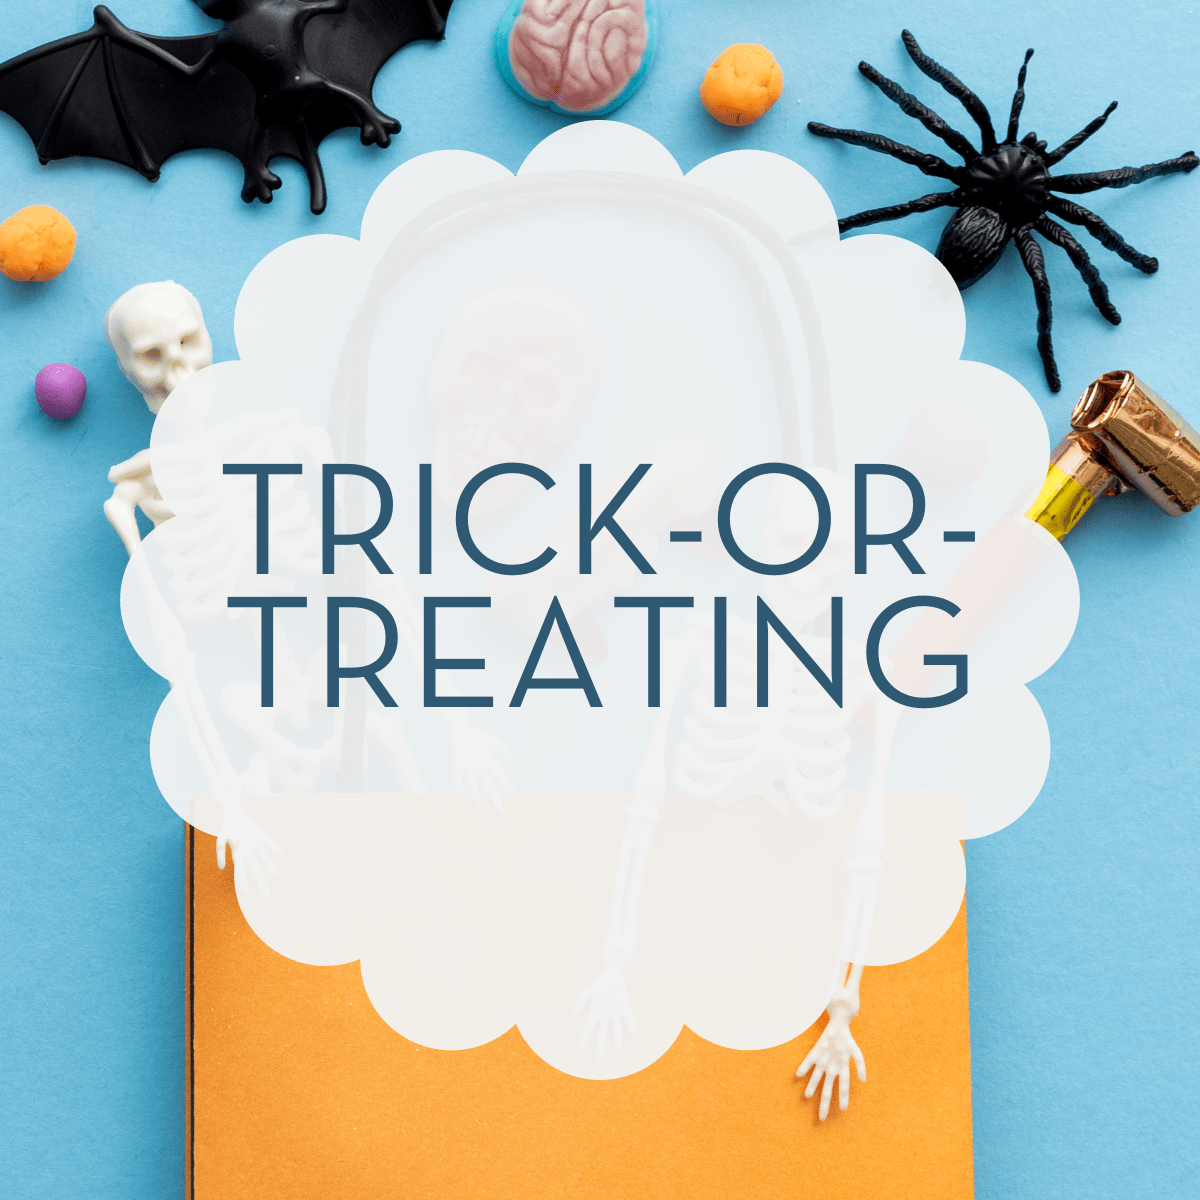 Guide to Trick-or-Treating in and Around Dallas